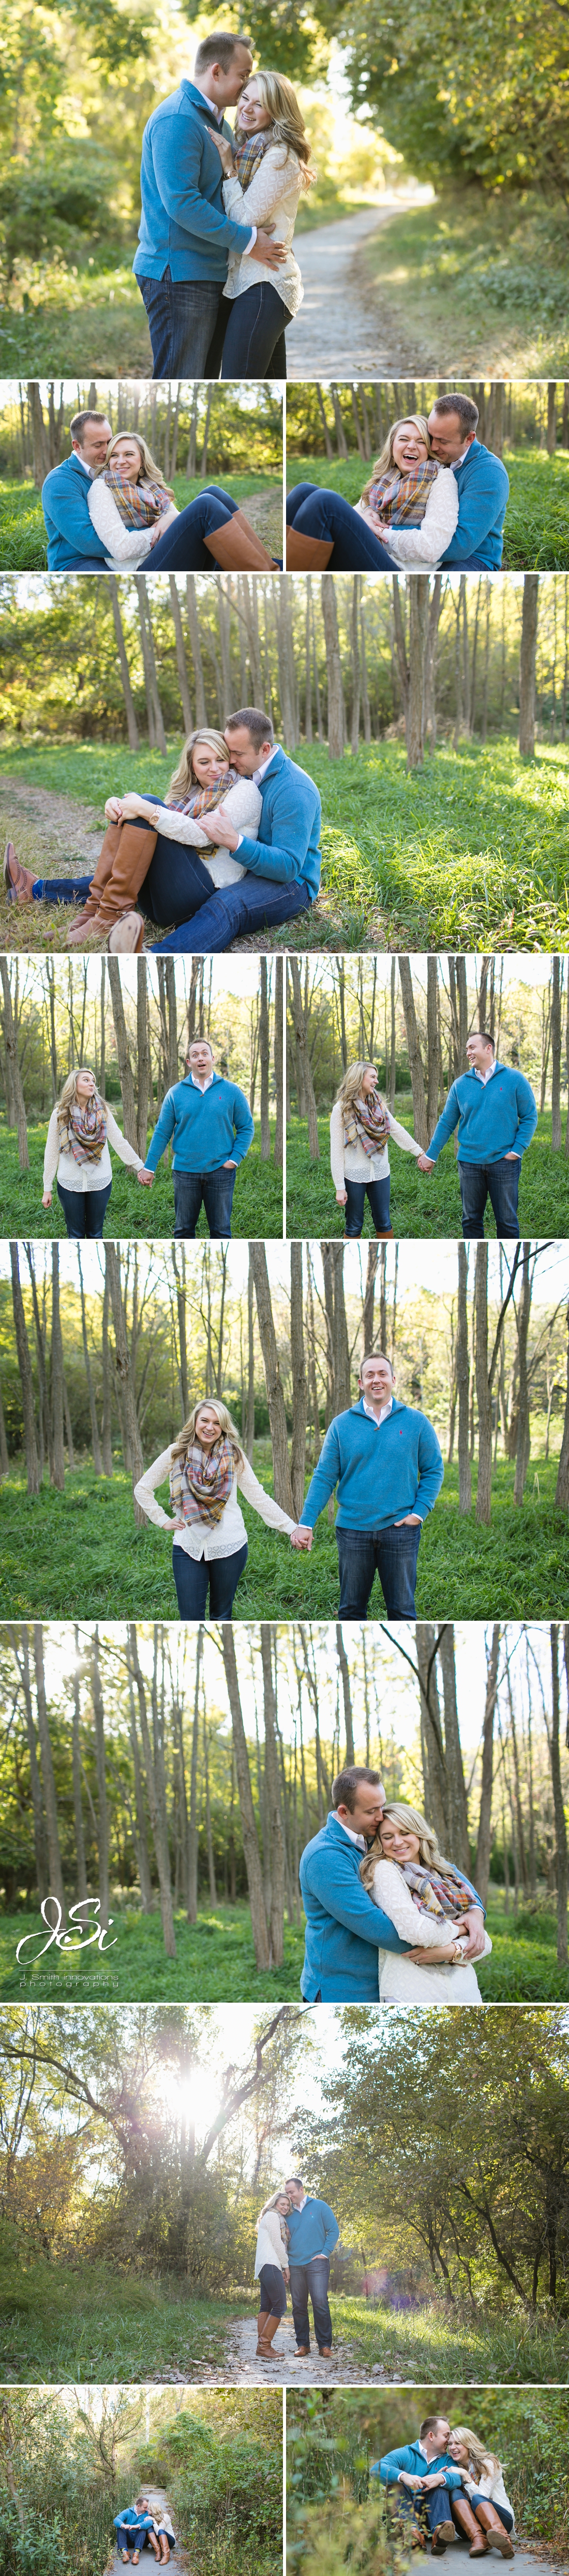 Parkville outdoor woods sweet engagement session photo